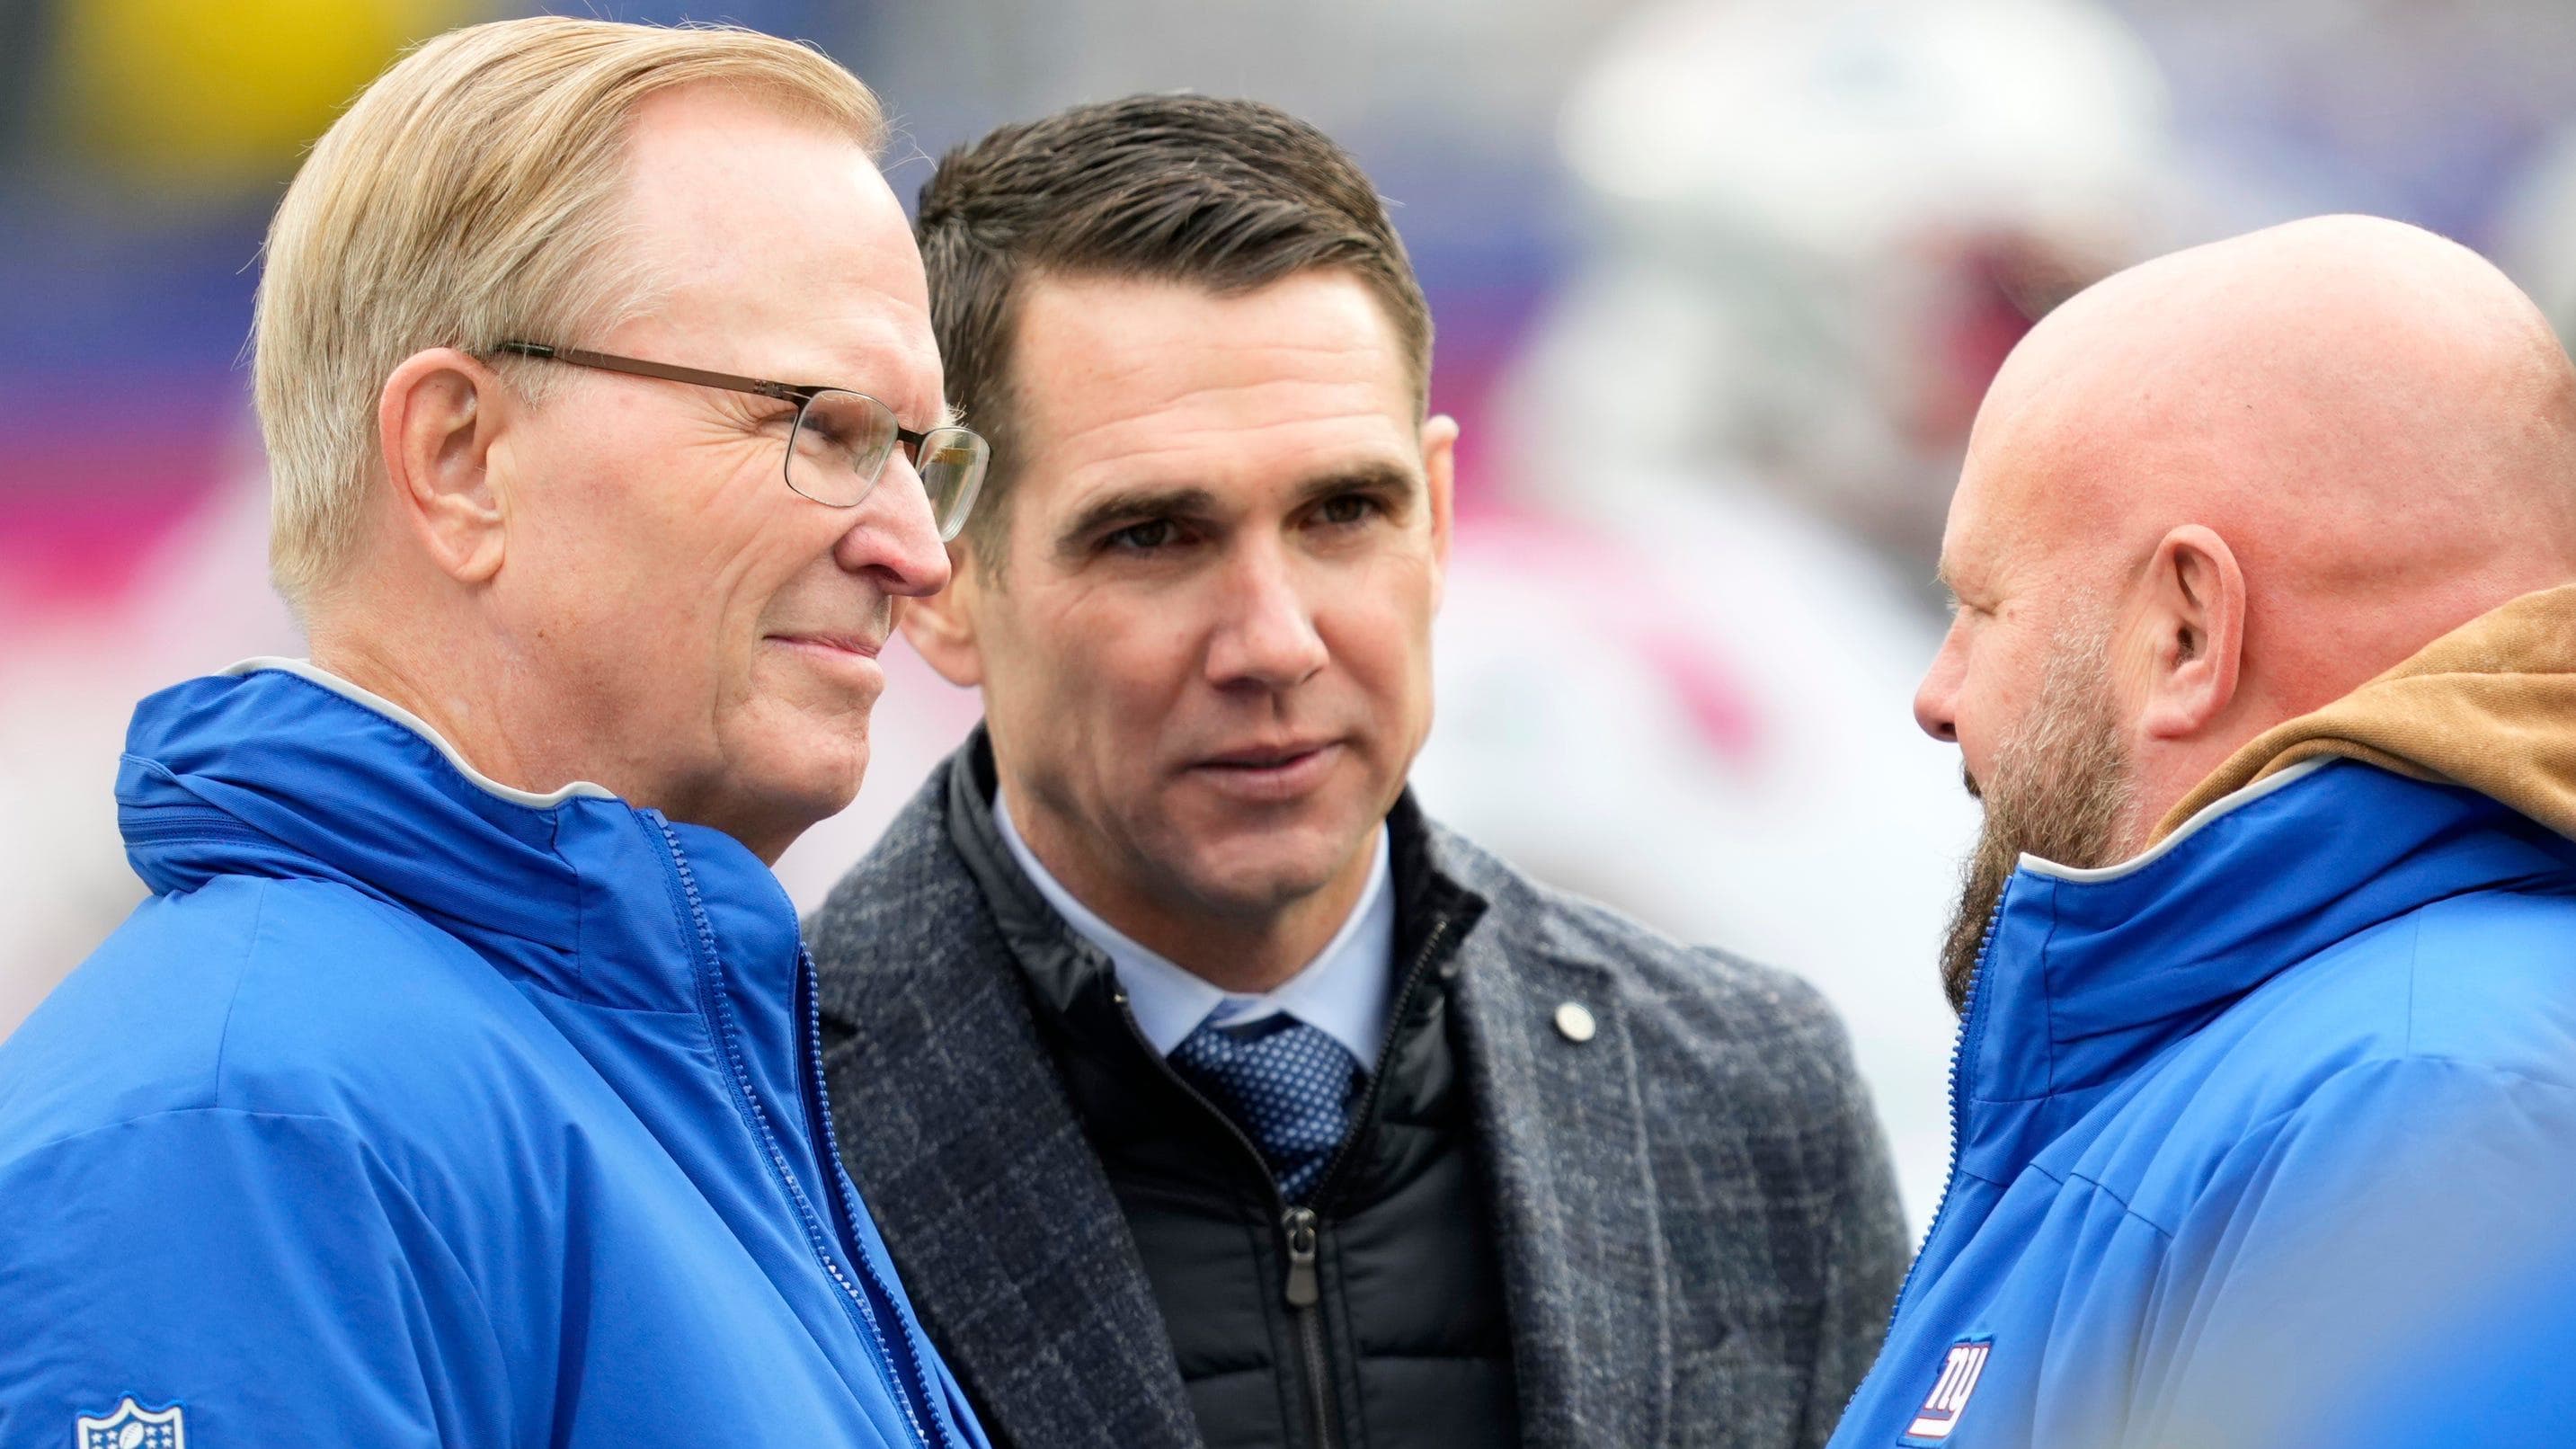 From left to right: New York Giants COO John Mara (left), General Manager Joe Schoen, and head coach Brian Daboll 